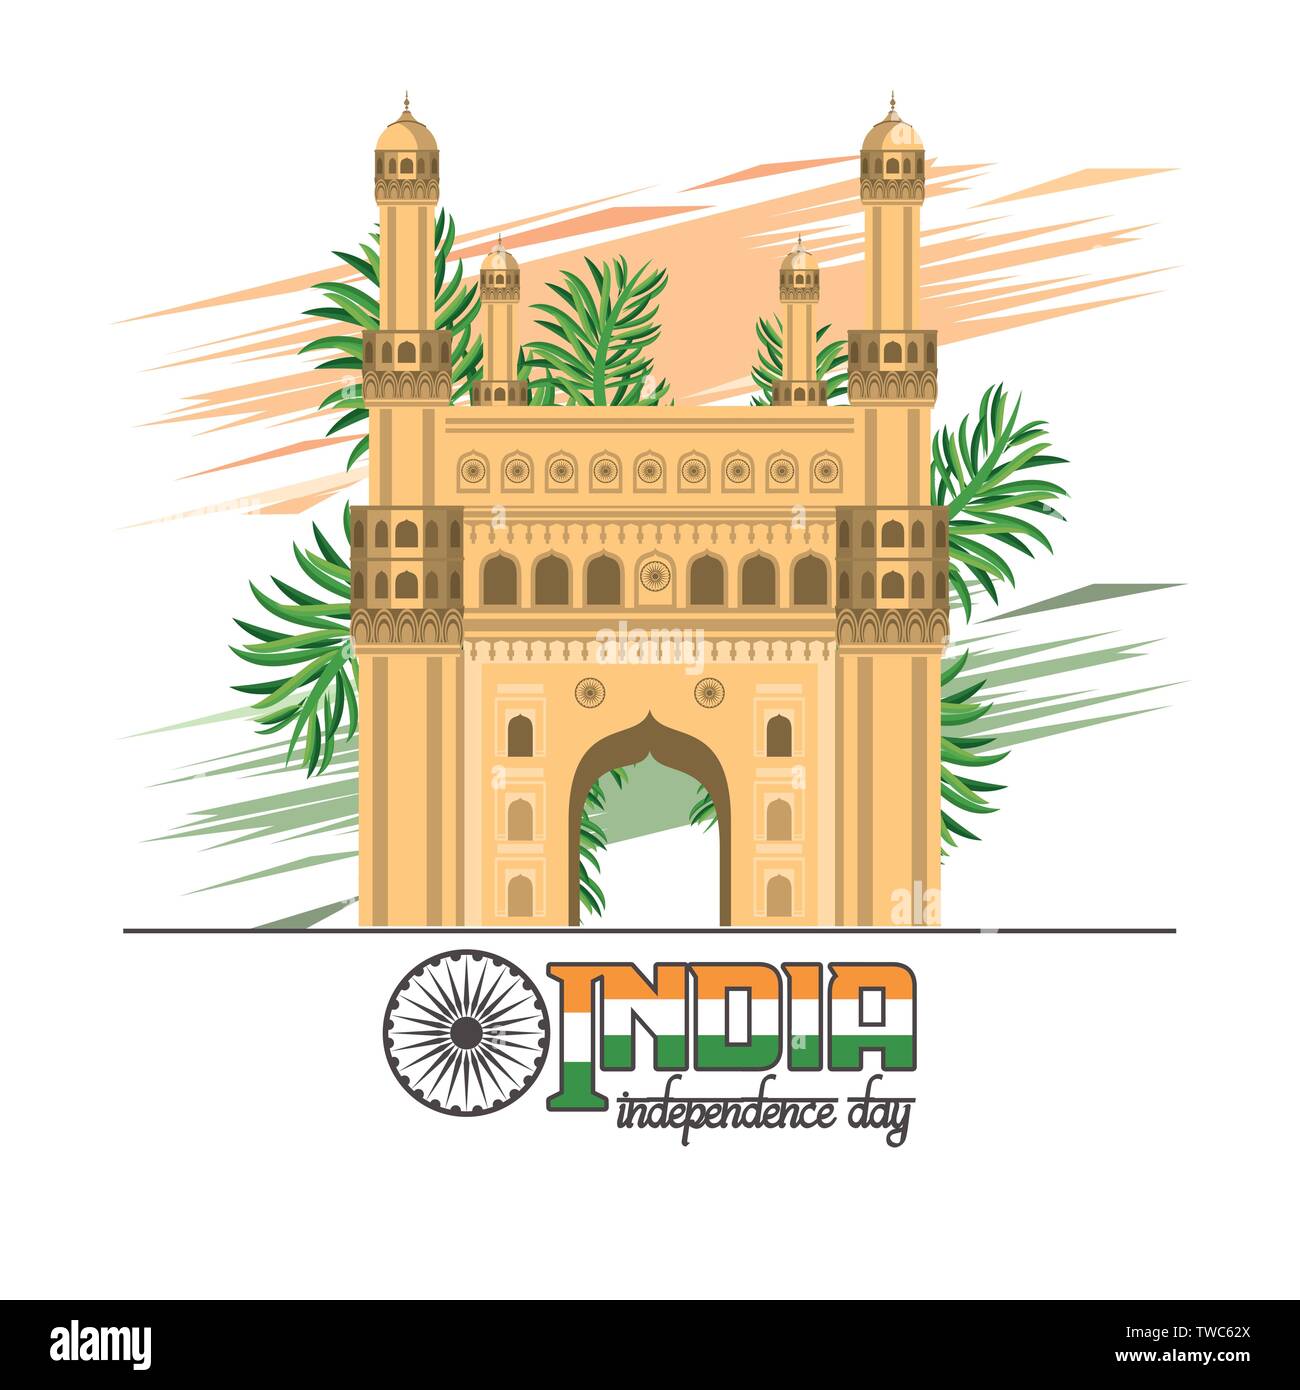 India independence day card colorful Stock Vector